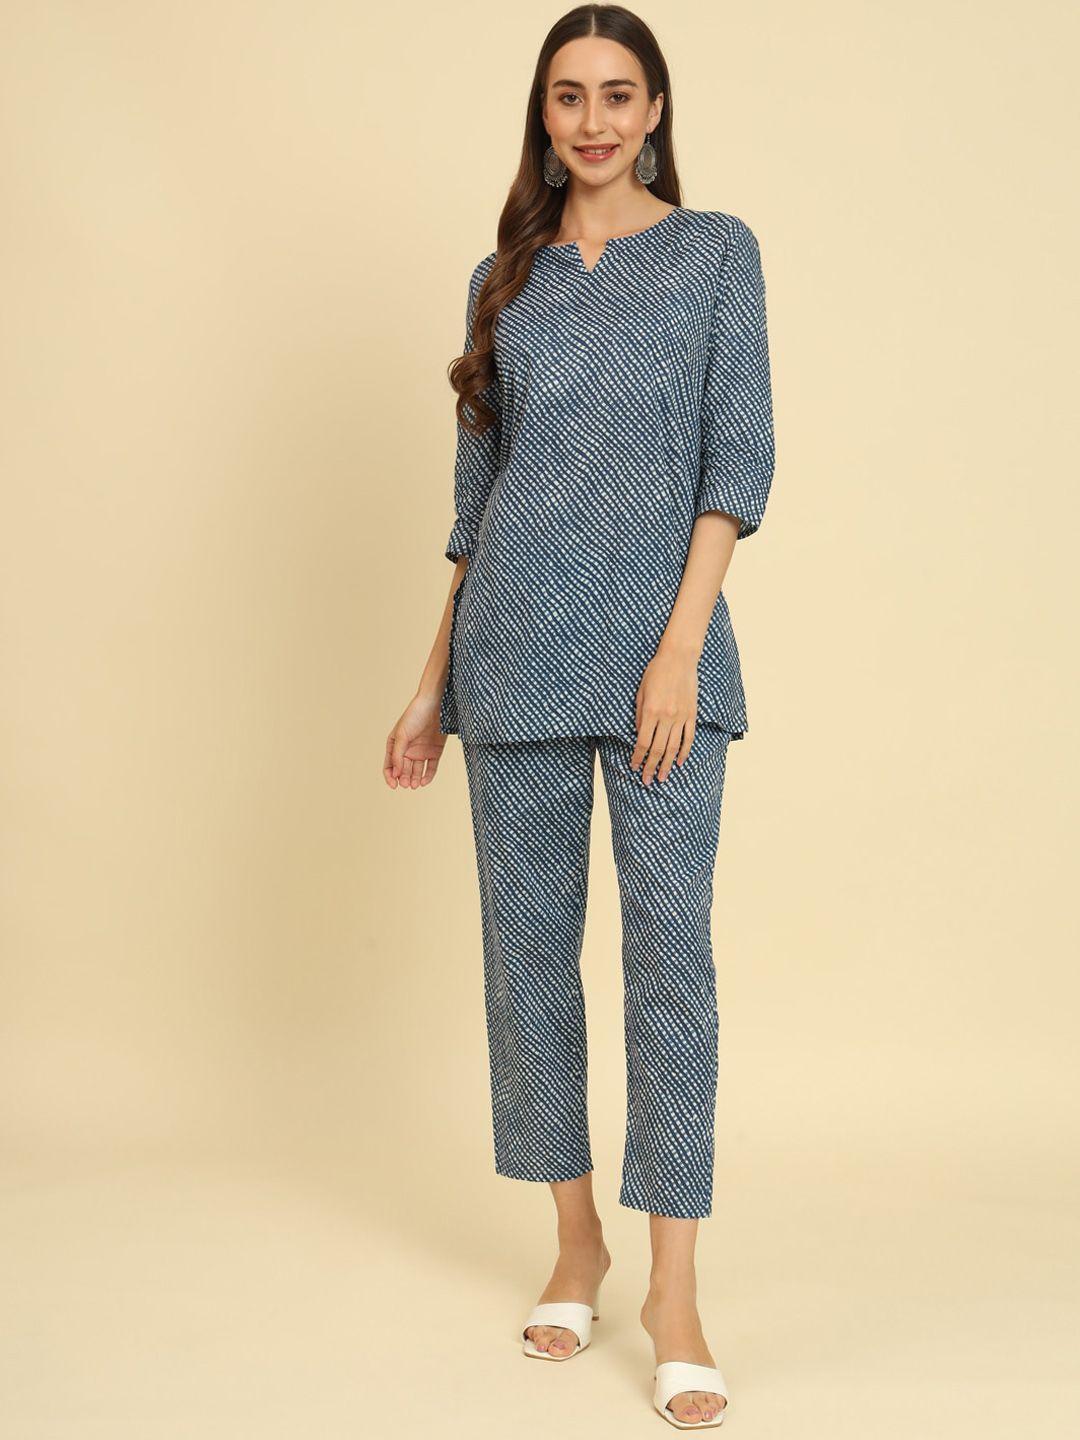 sutidora checked pure cotton kurti with trousers